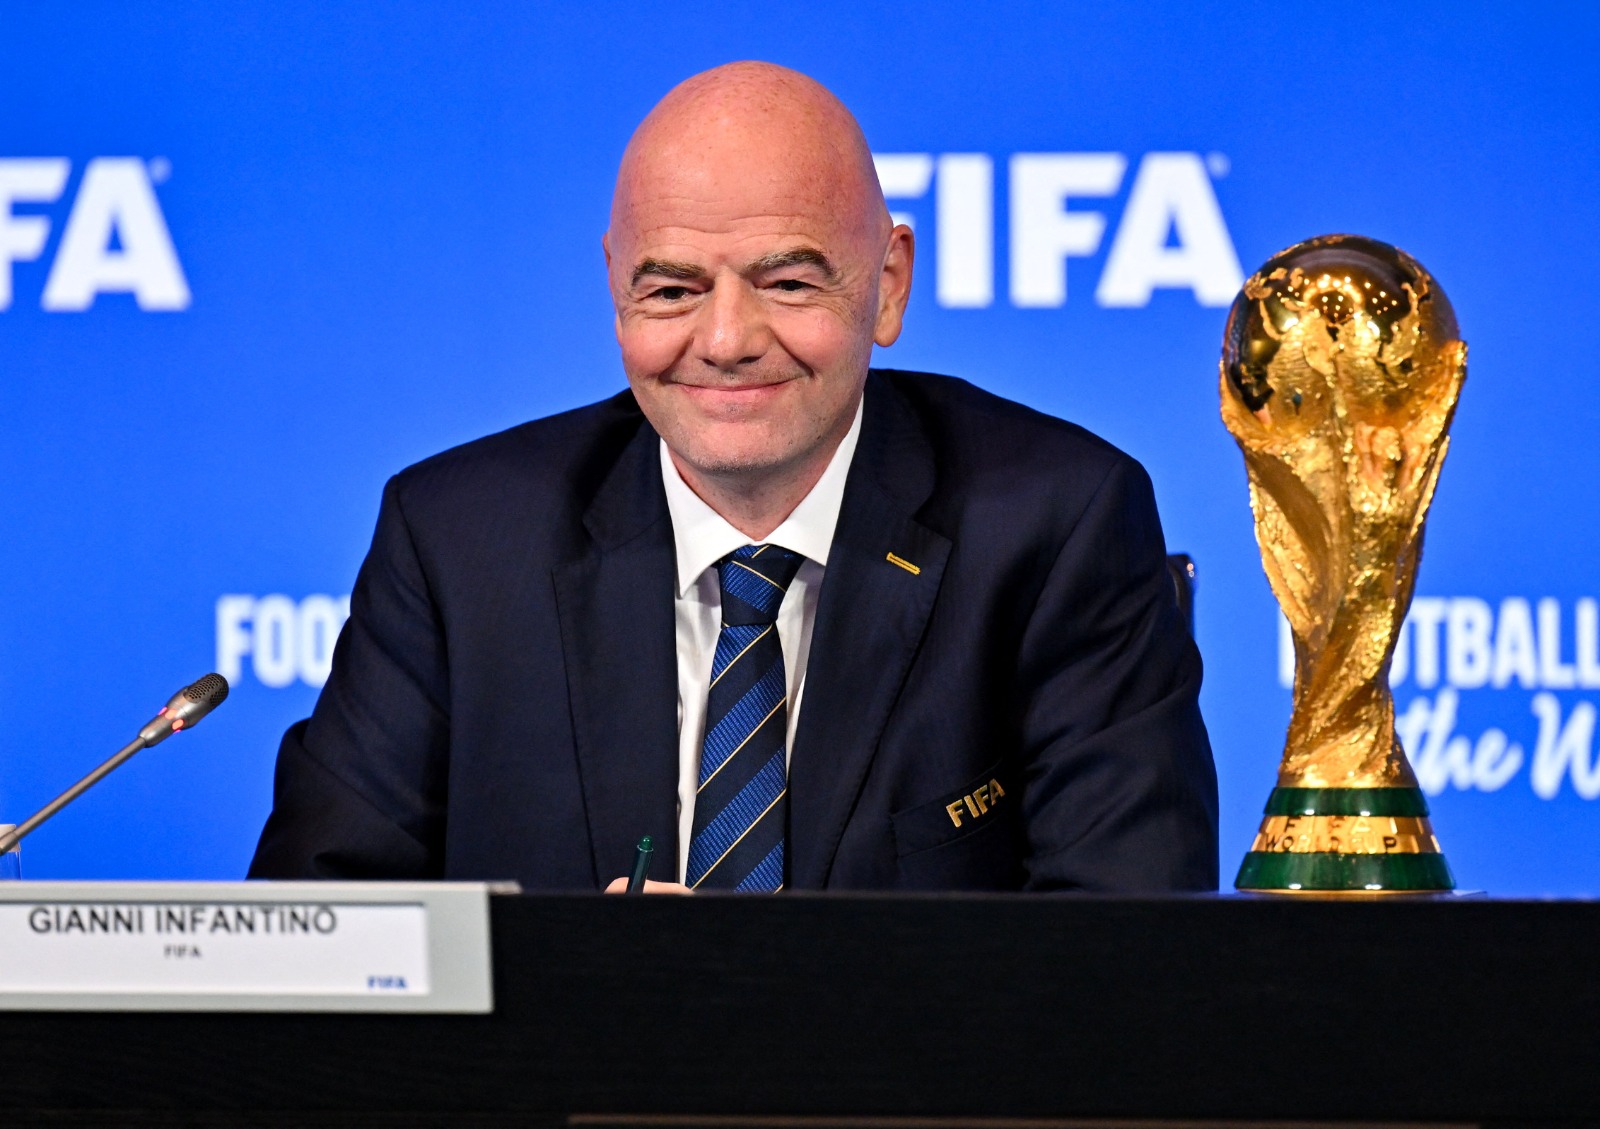 2030 World Cup To Be Hosted In Morocco, Spain & Portugal With Three Games In South America